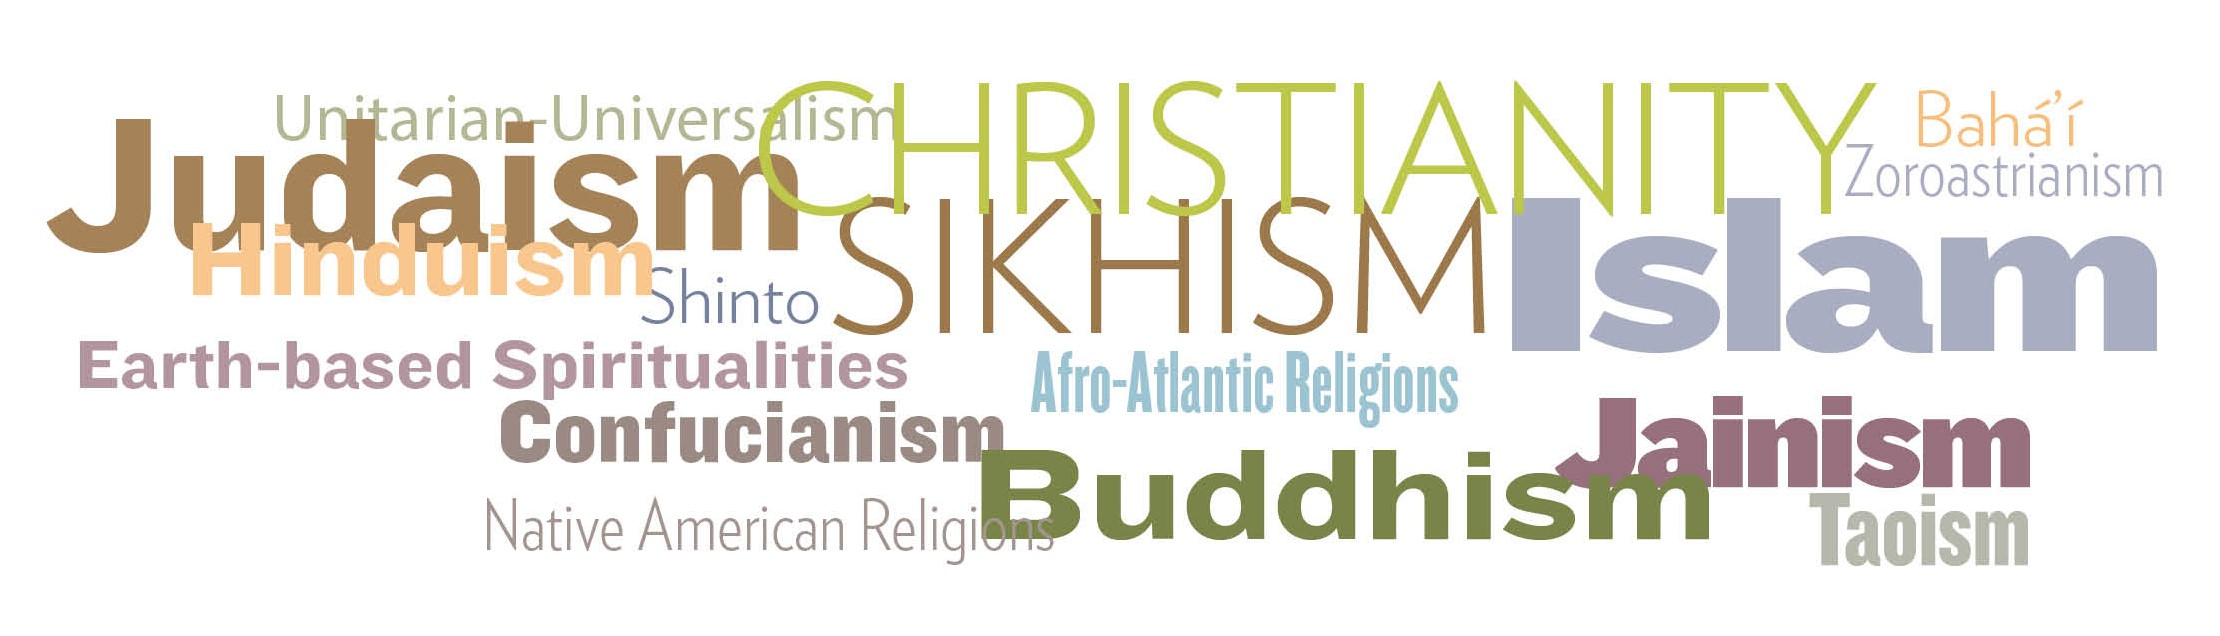 =graphic image with names of various religions